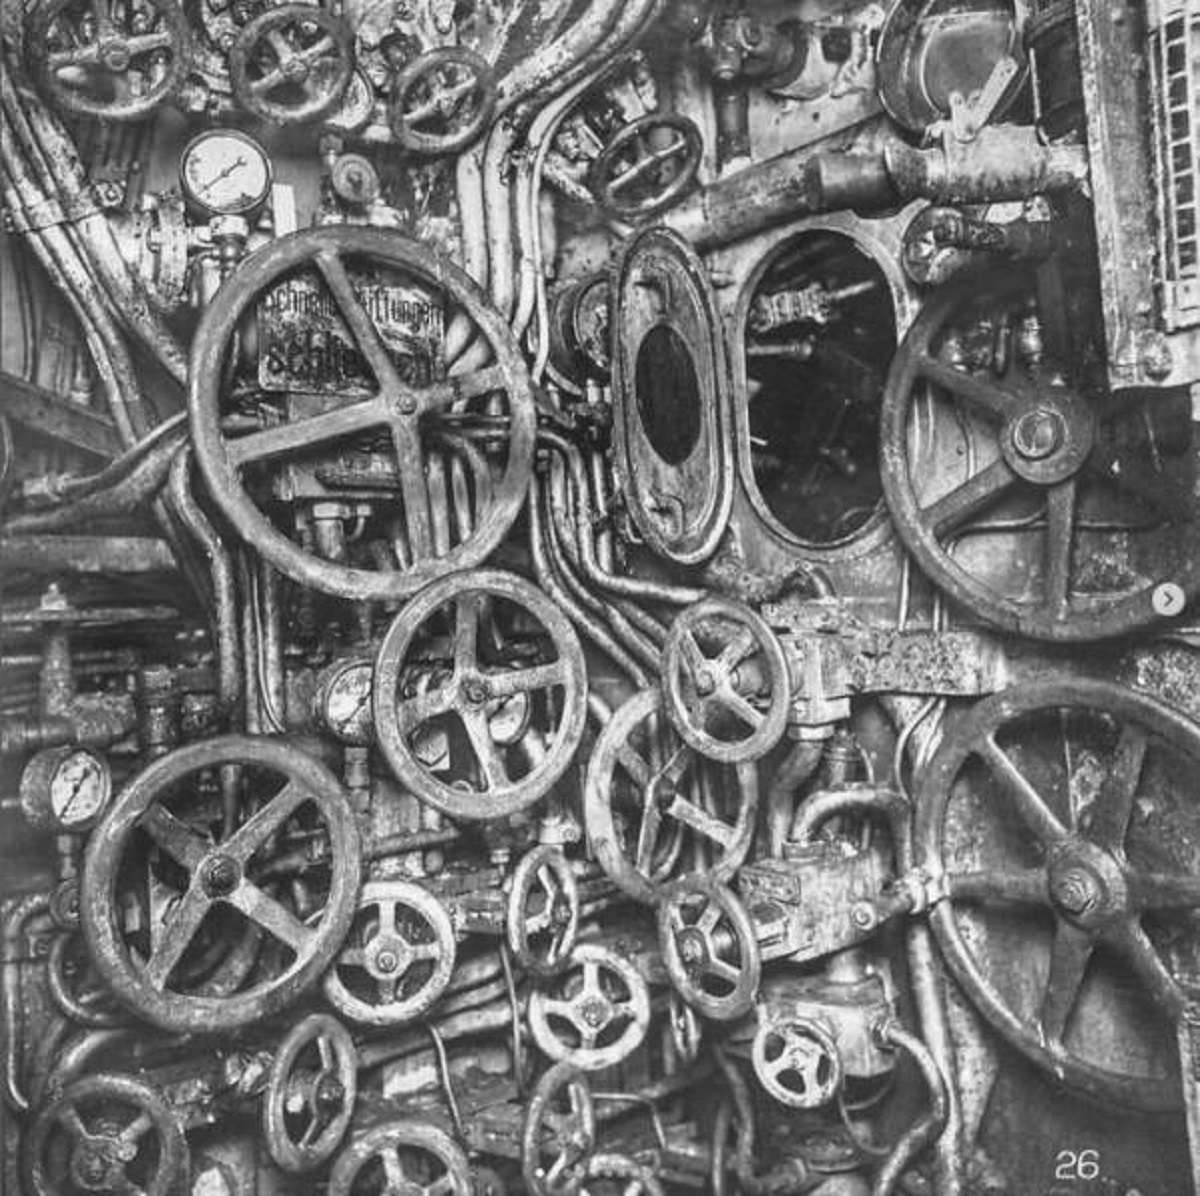 "The Photographs Of The Control Room Of A World War I German Submarine (Ub-110) In 1918"